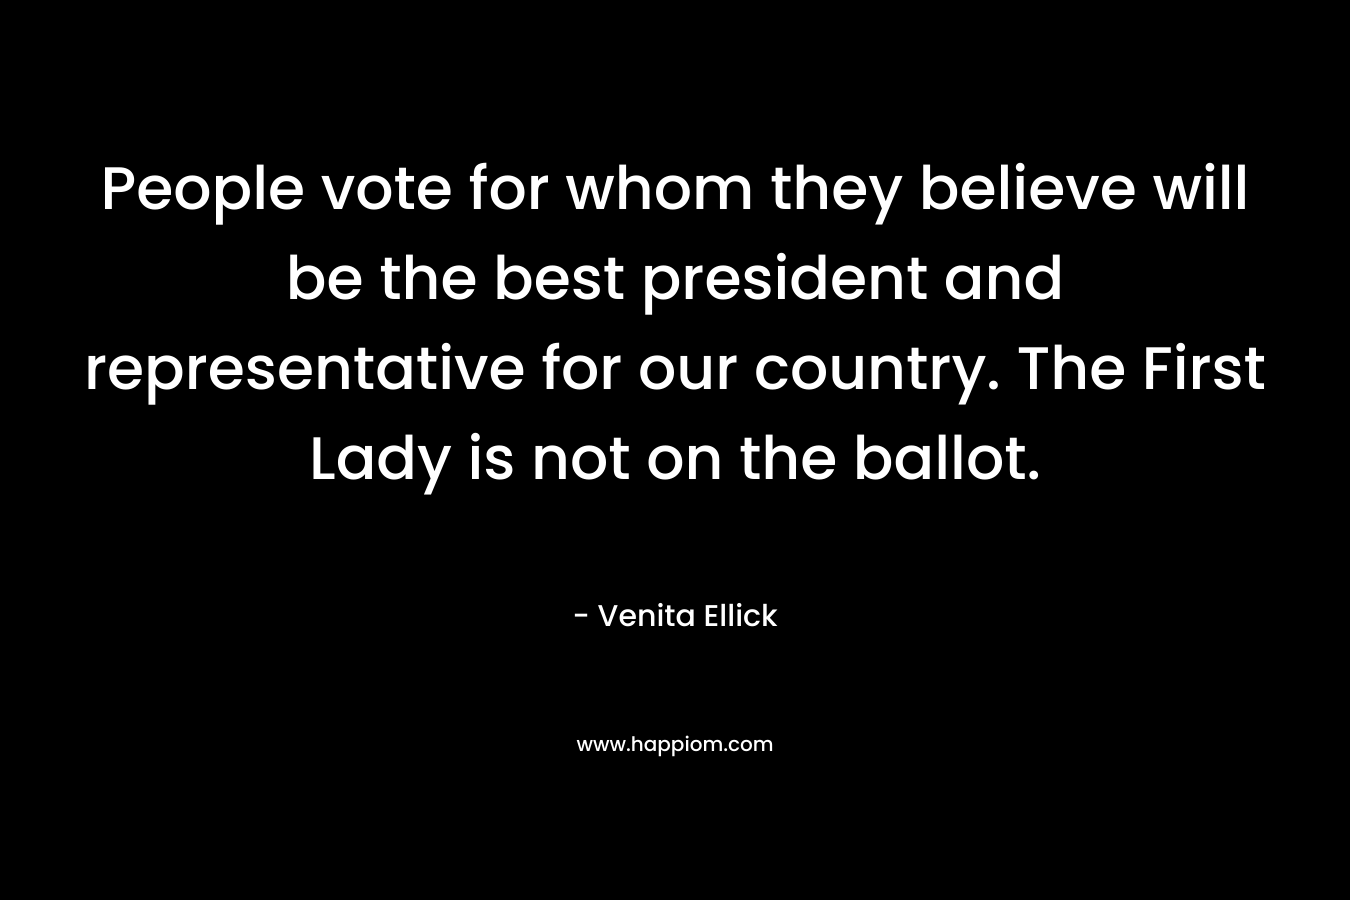 People vote for whom they believe will be the best president and representative for our country. The First Lady is not on the ballot. – Venita Ellick